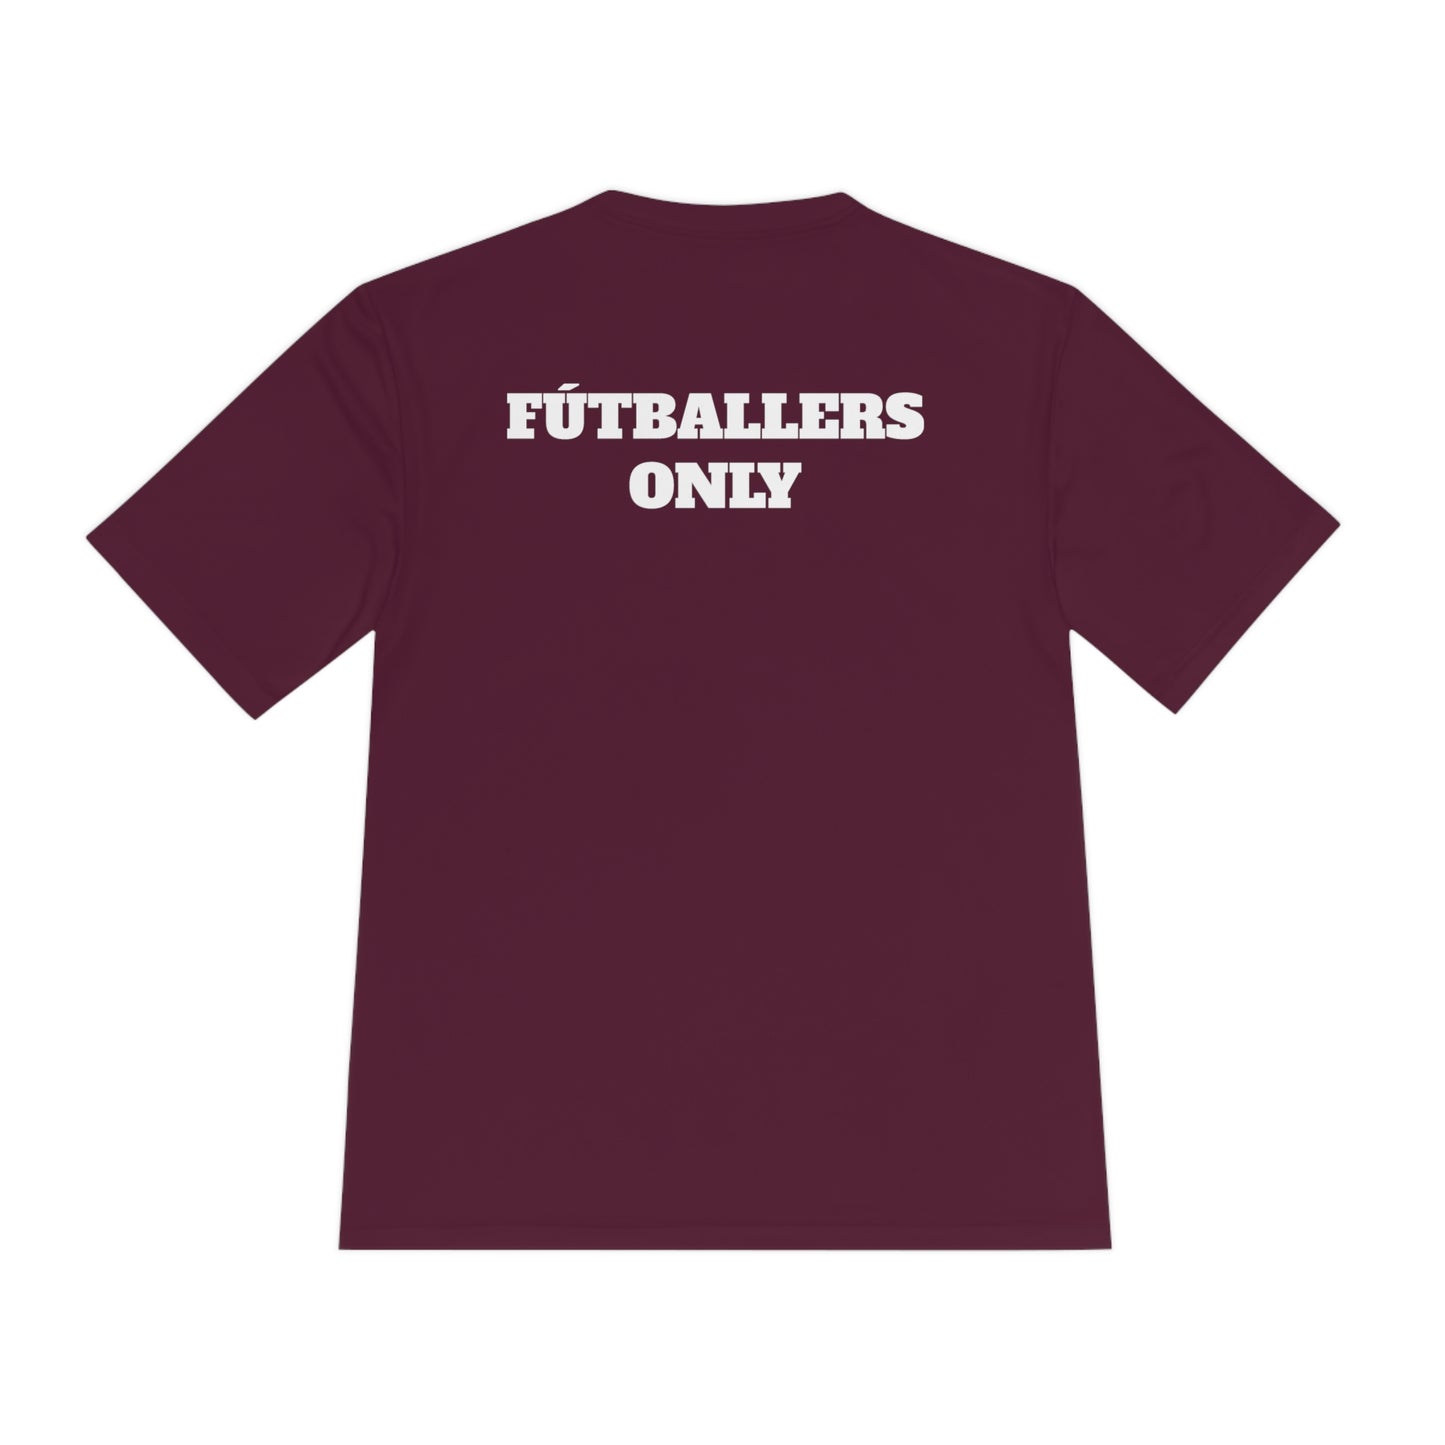 FÚTBALLERS ONLY Athletic T-Shirt (Unisex)